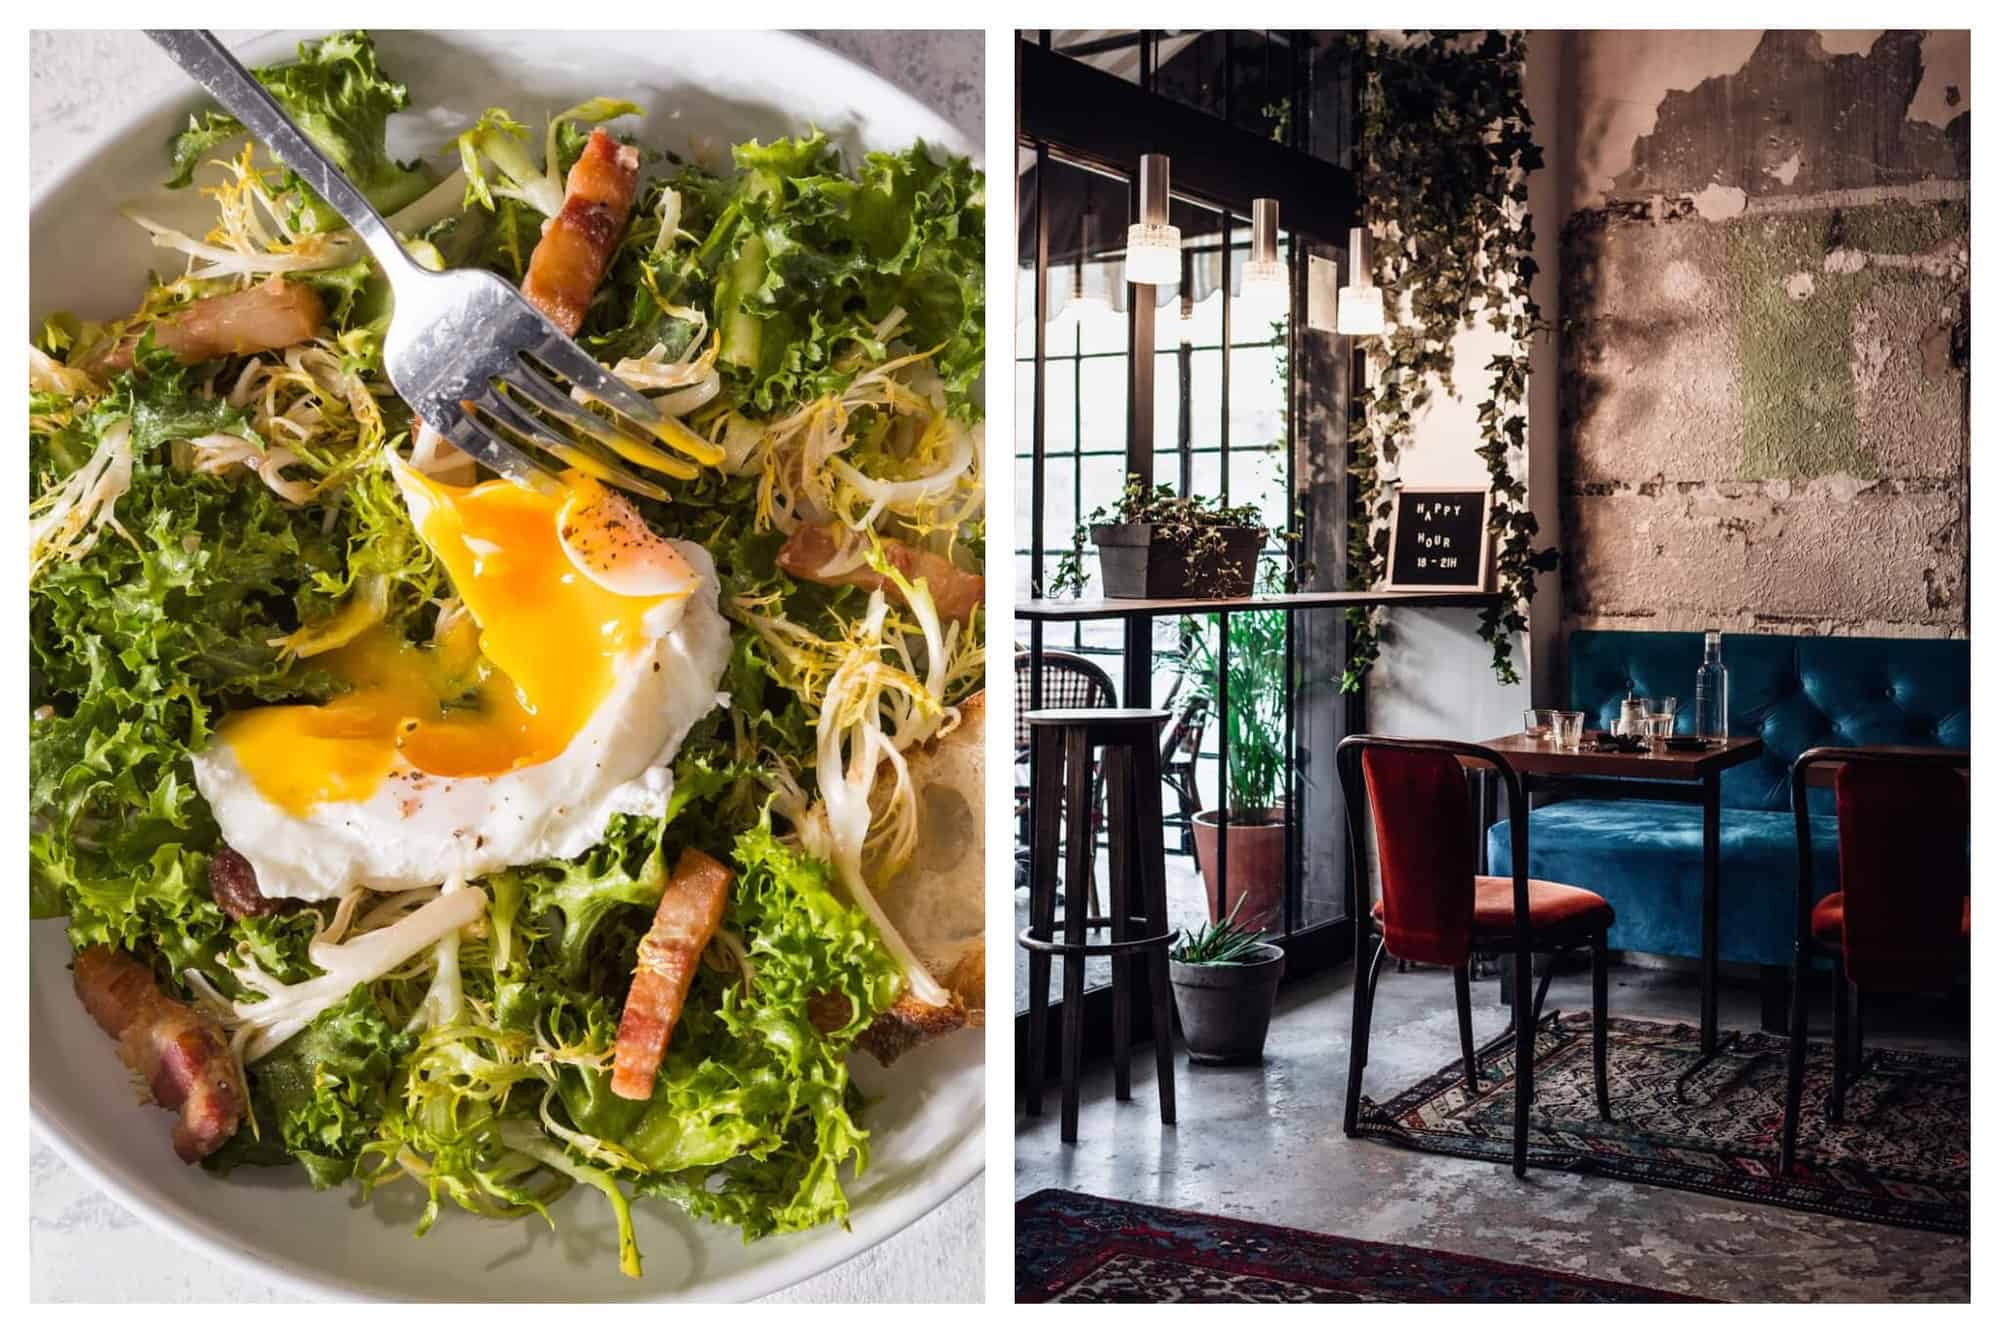 Left: A Lyonnaise salad. Right: The indoors of a restaurant in Paris.